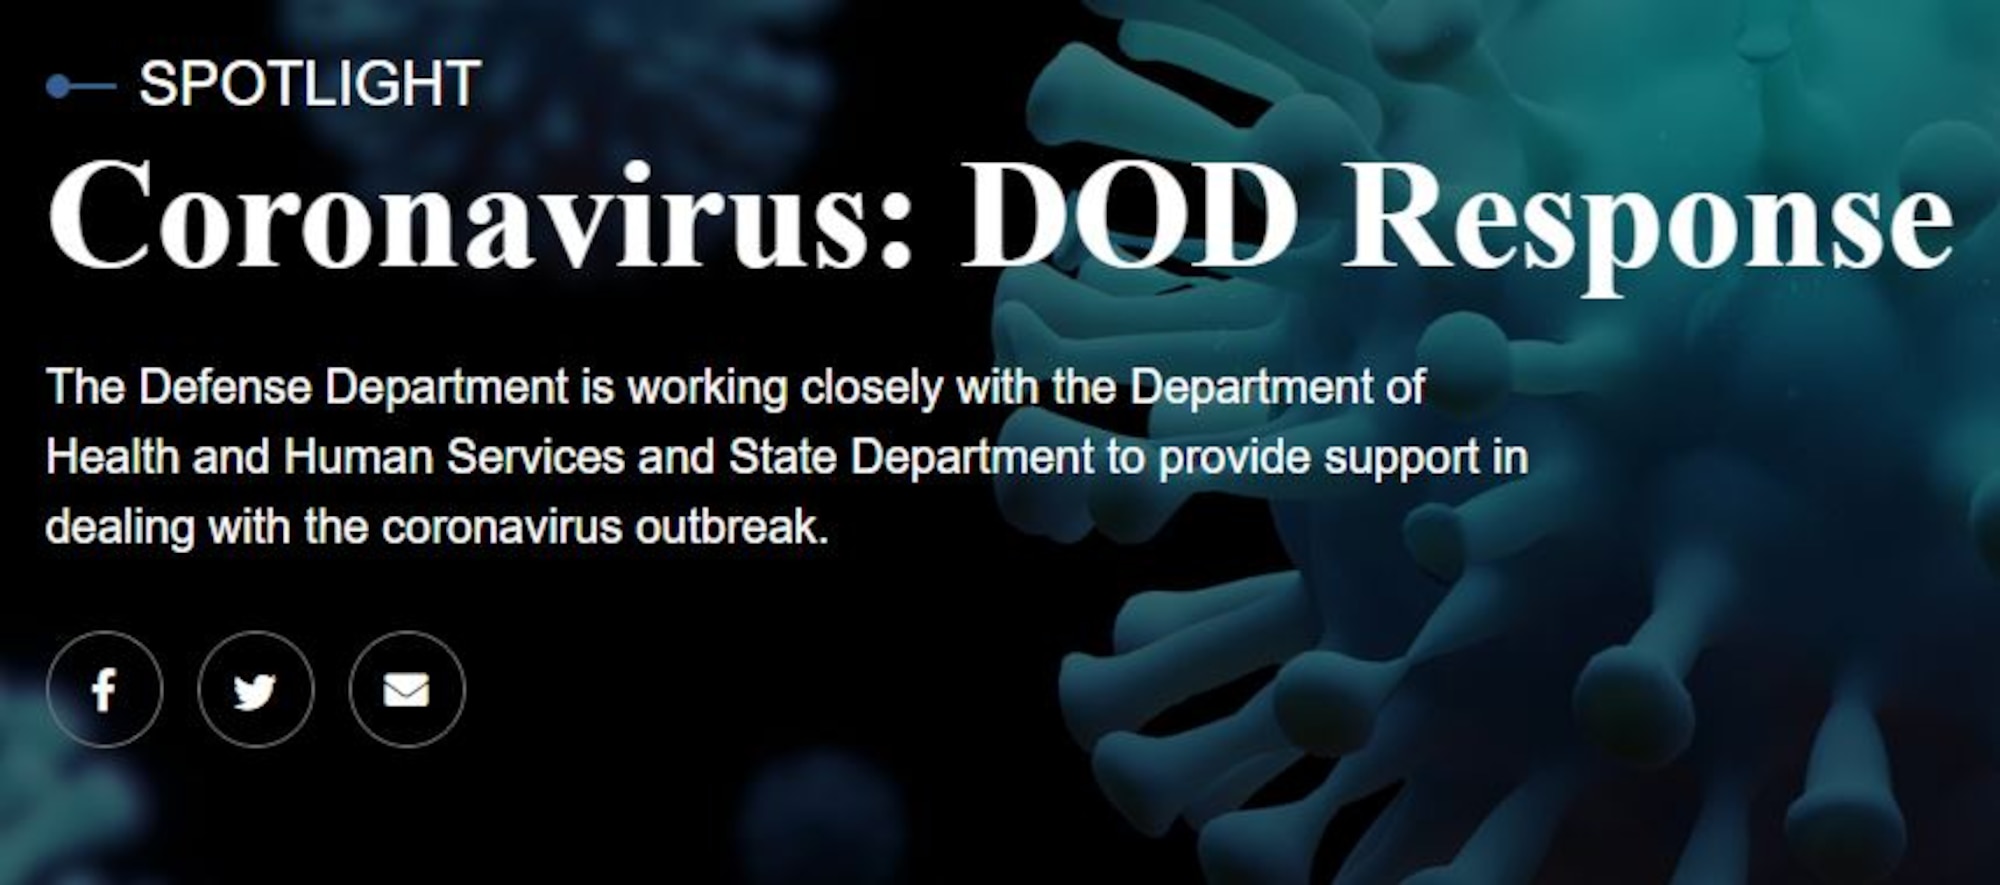 The Defense Department is working closely with the Department of Health and Human Services and State Department to provide support in dealing with the coronavirus outbreak.